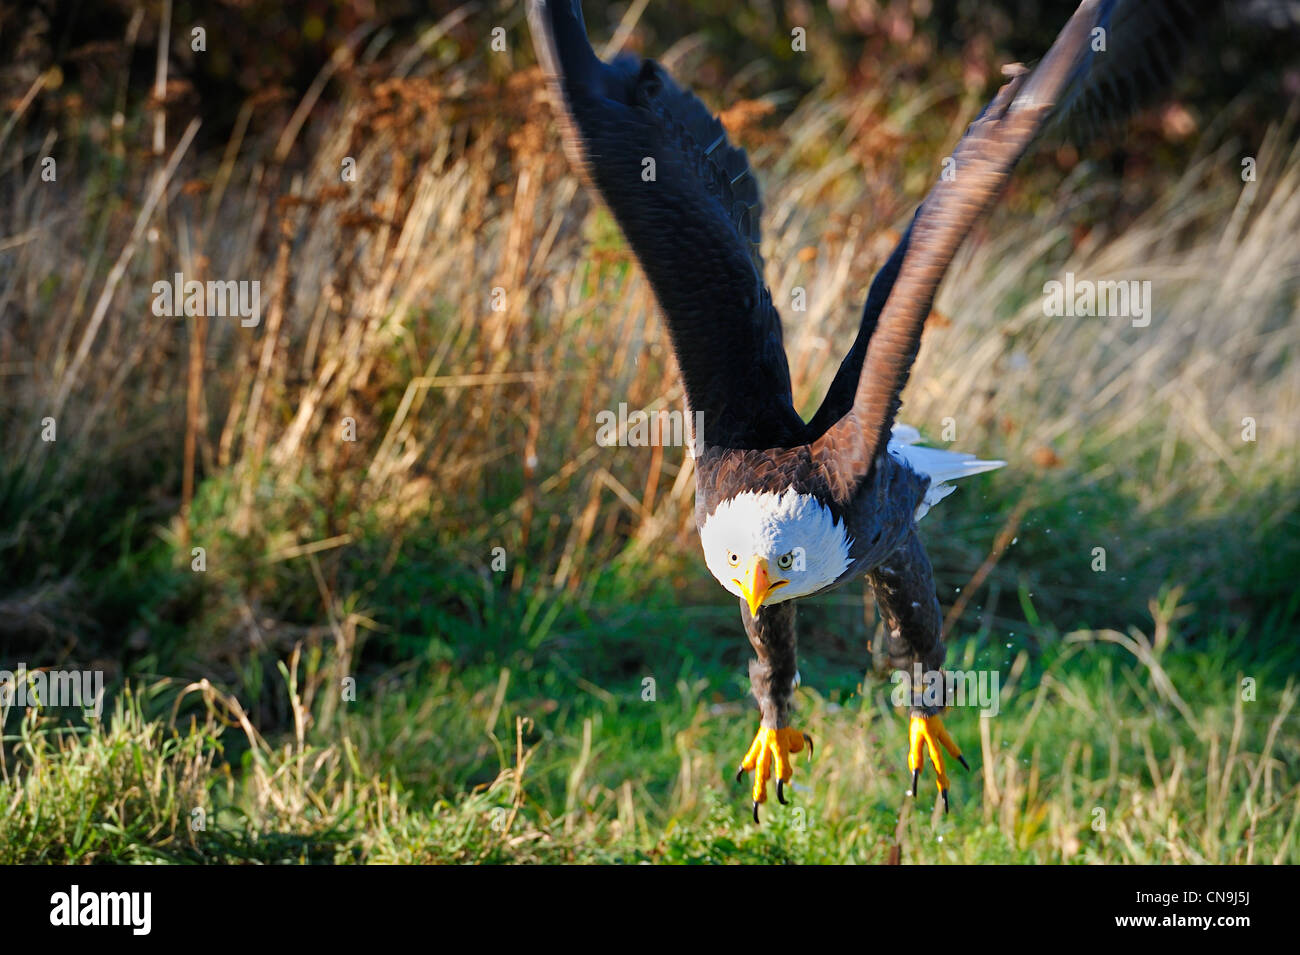 Bald eagle flying free over meadow, wings spread. Stock Photo